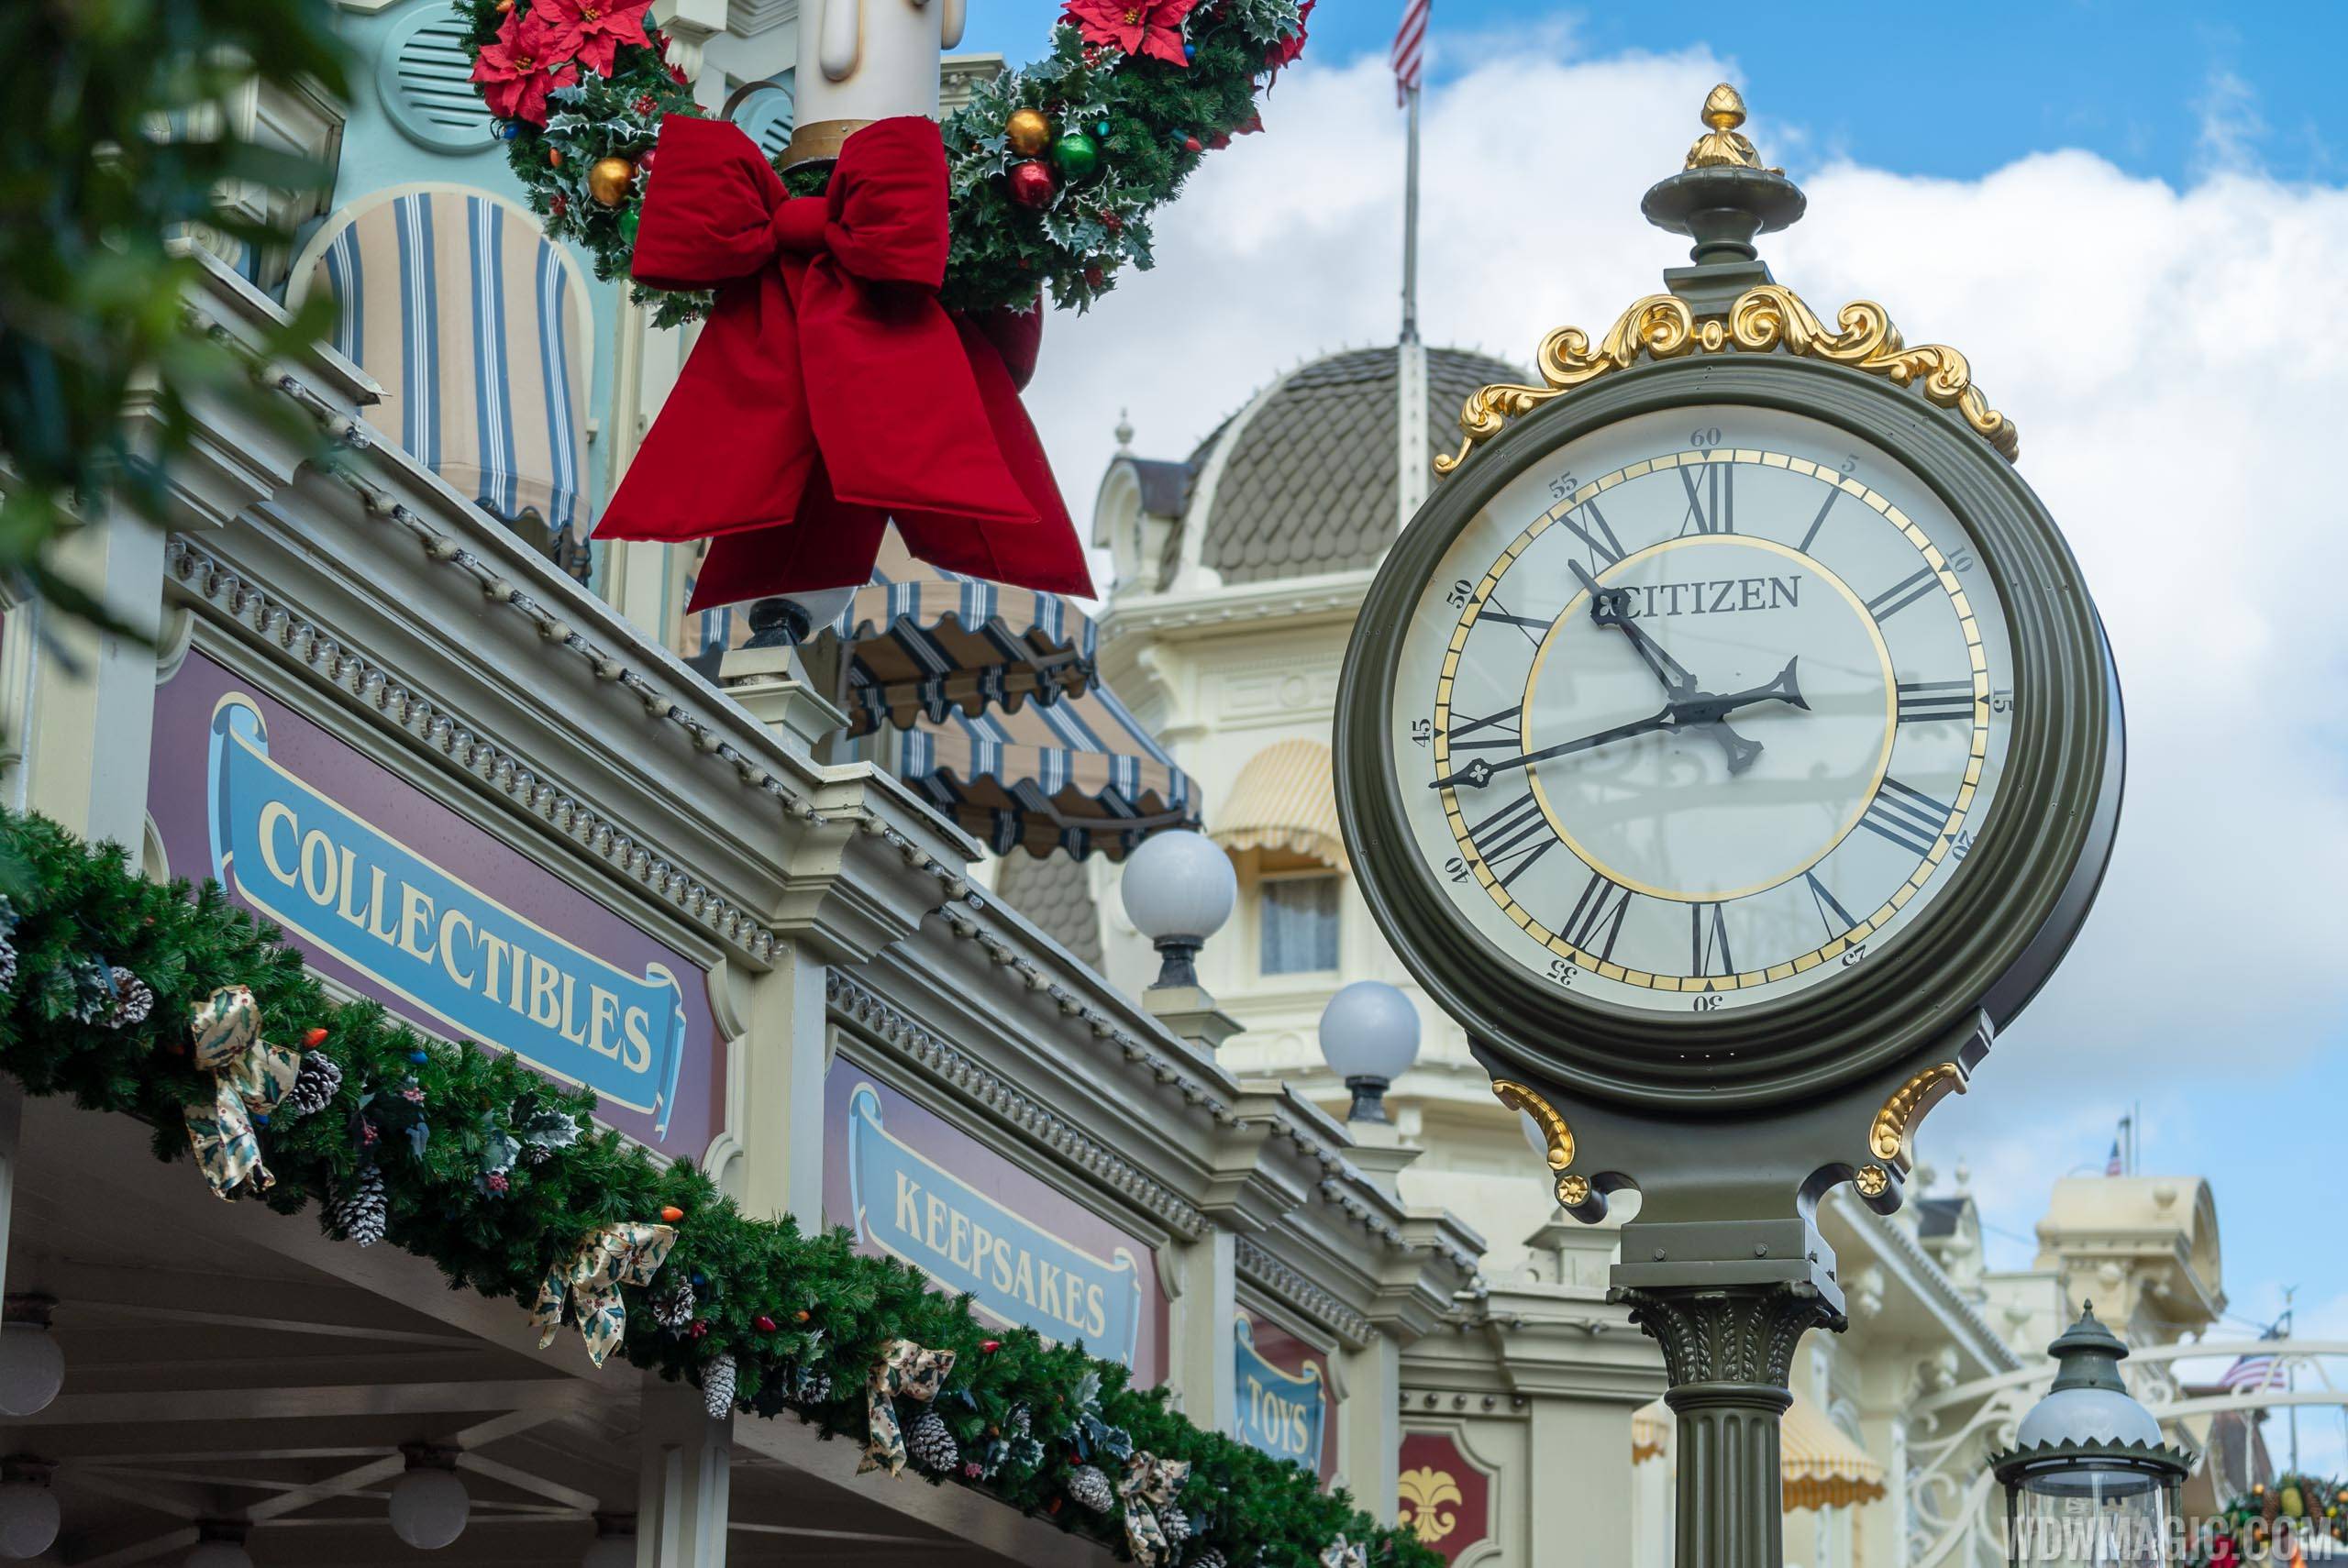 Newly branded Citizen in-park clock on Main Street U.S.A.